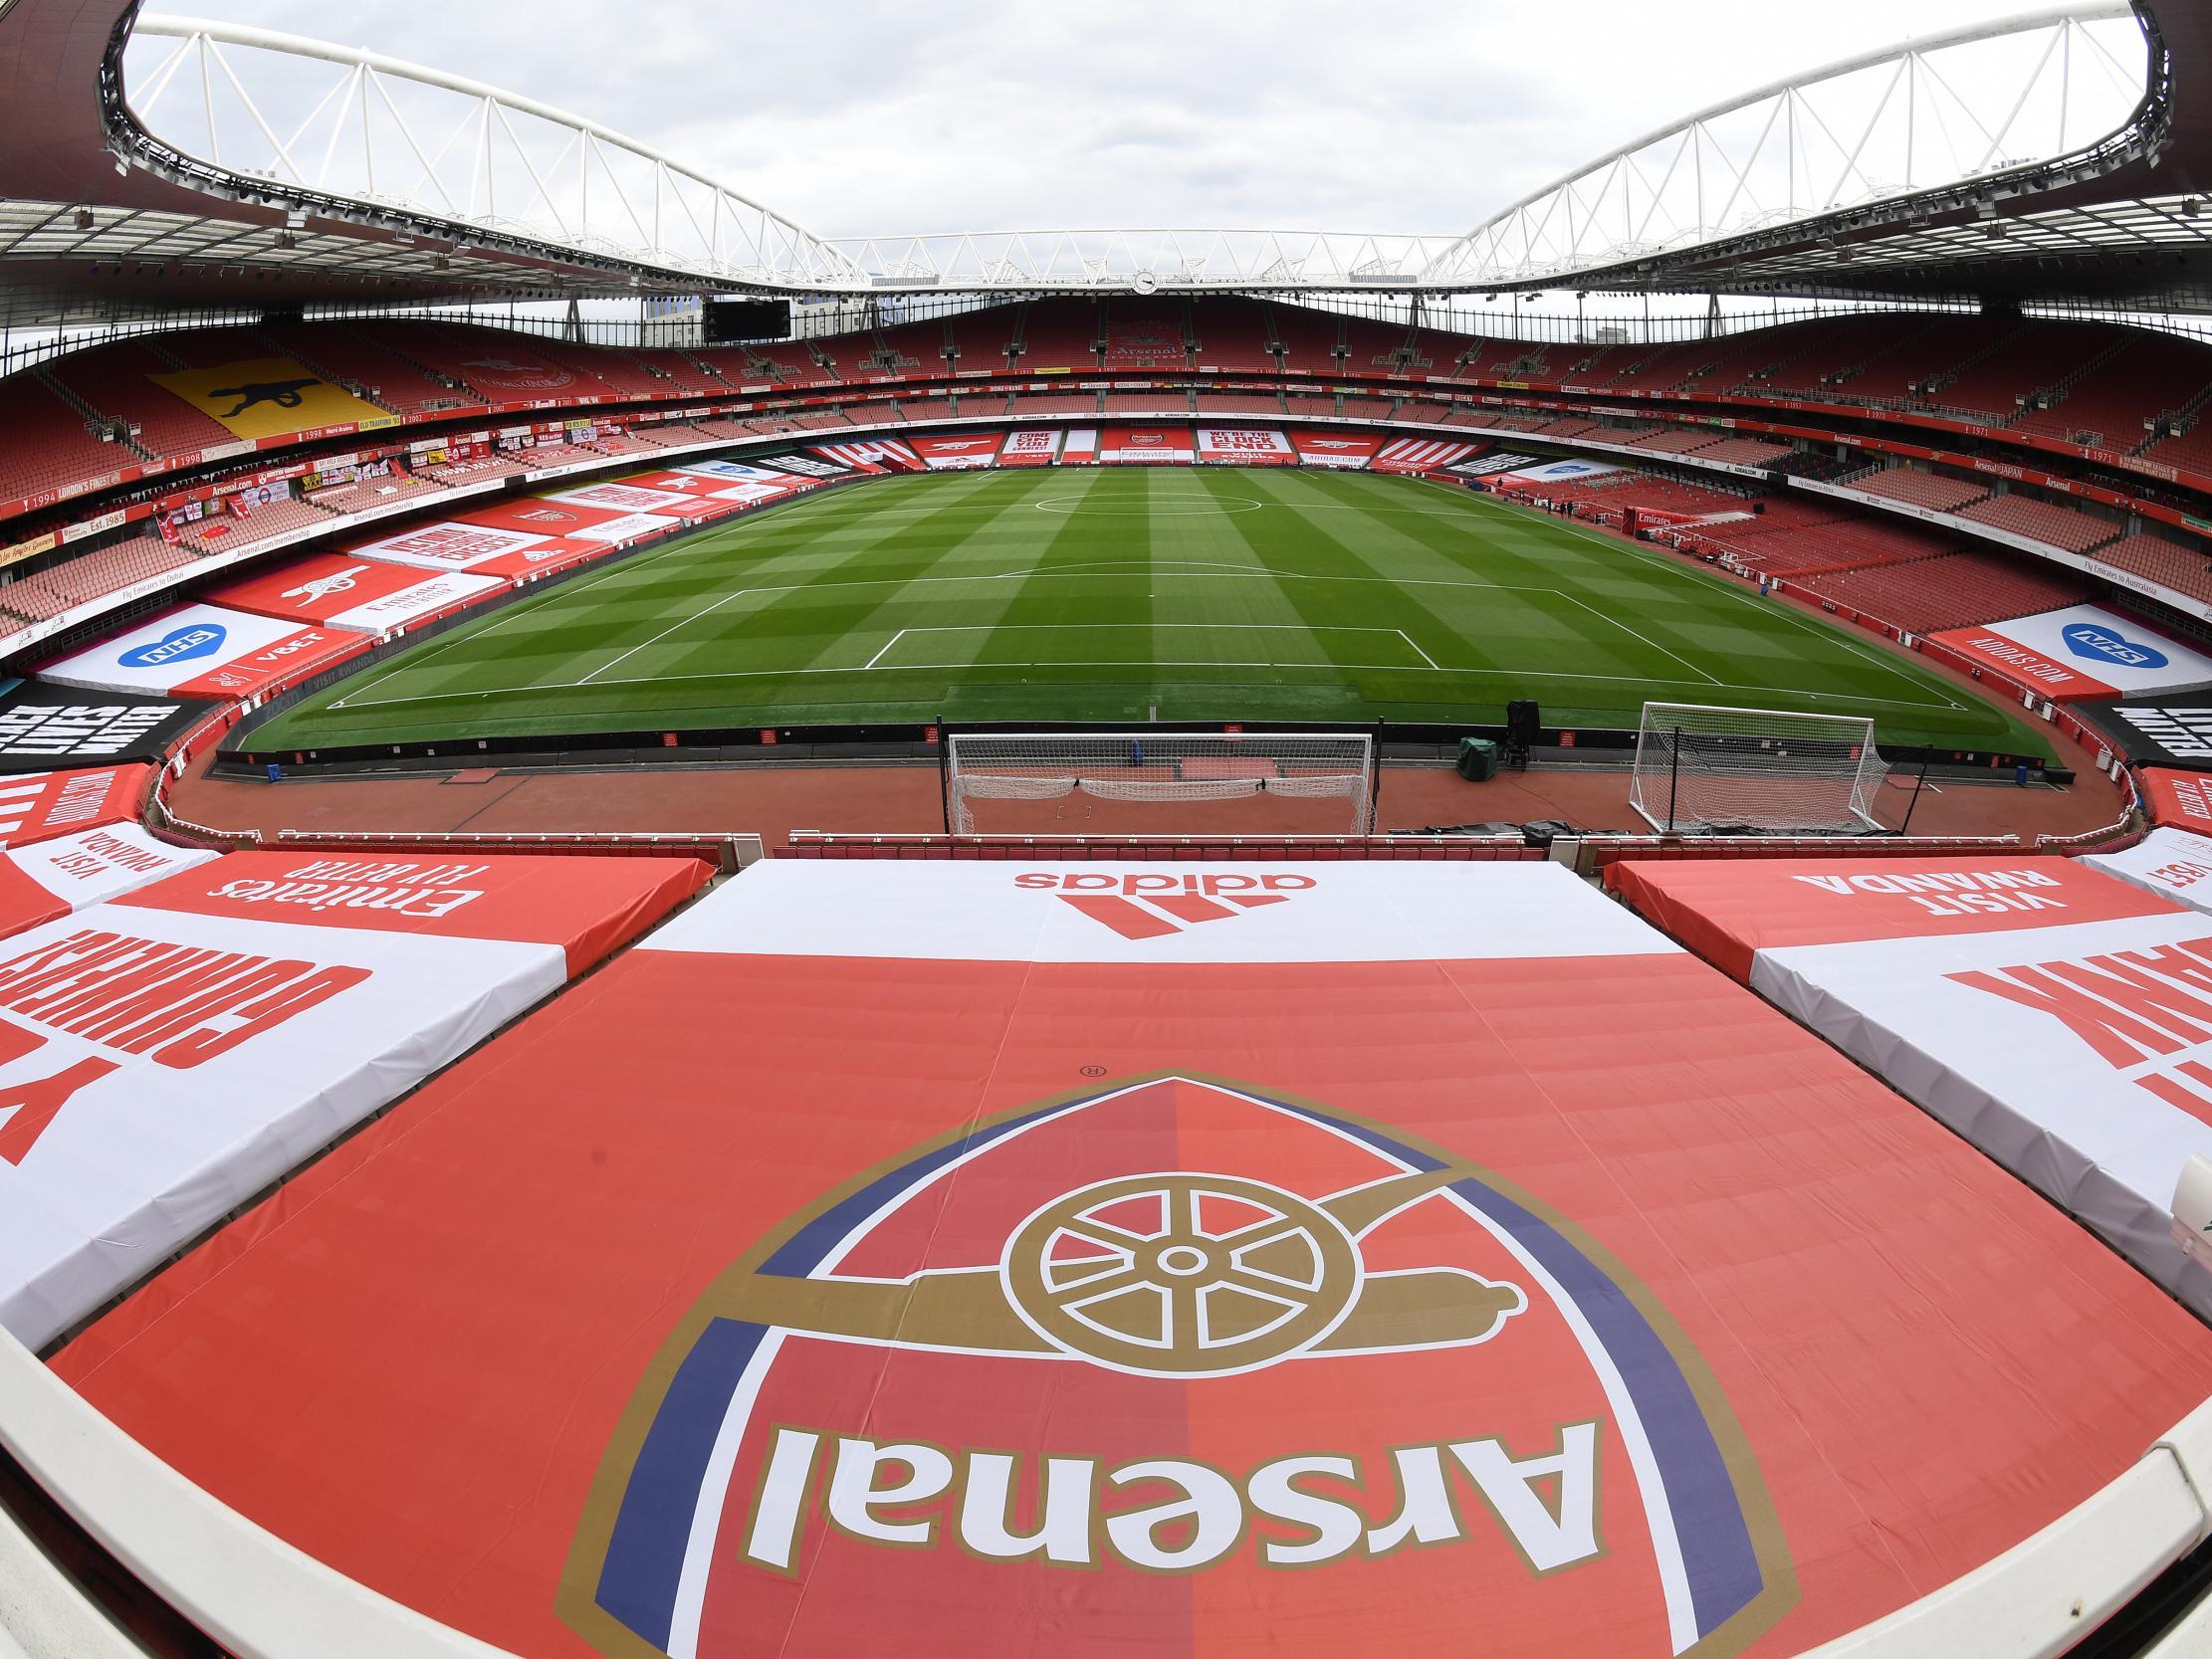 Arsenal say they have been badly impacted by the pandemic